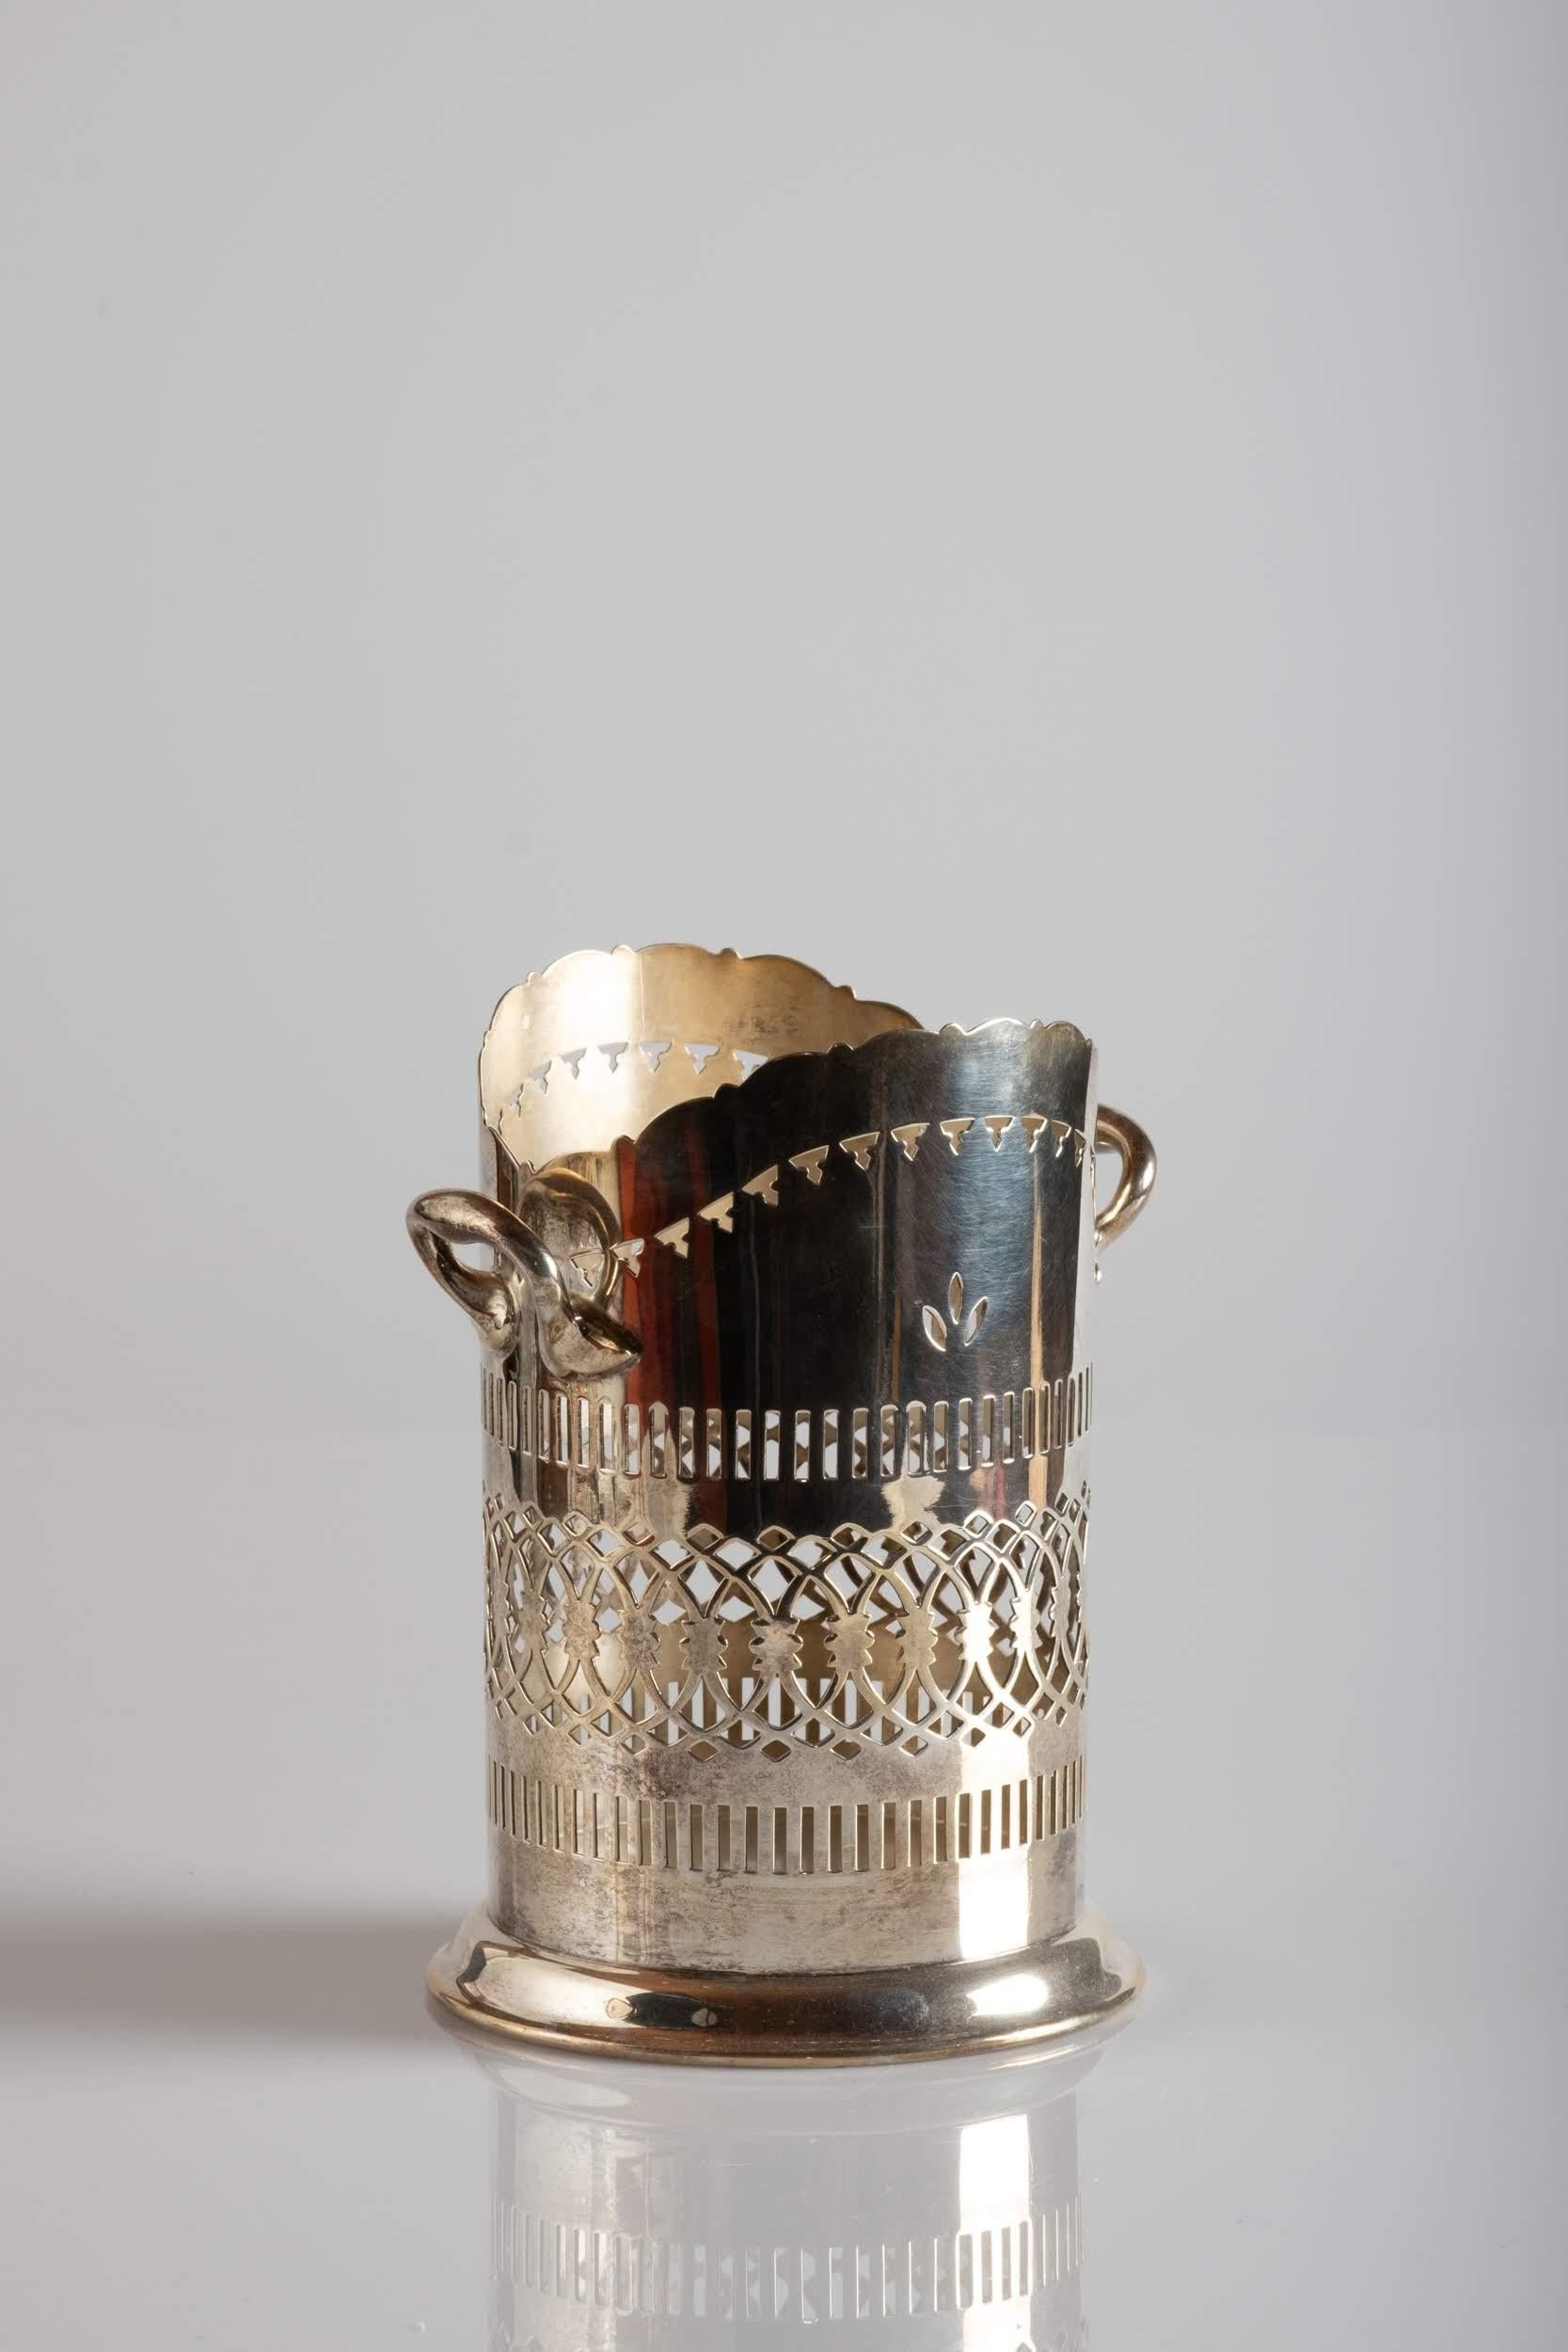 Finely decorated Sheffield plate bottle holder, from the marks at the bottom we see that it was produced in the beginning of the 20th century in London.